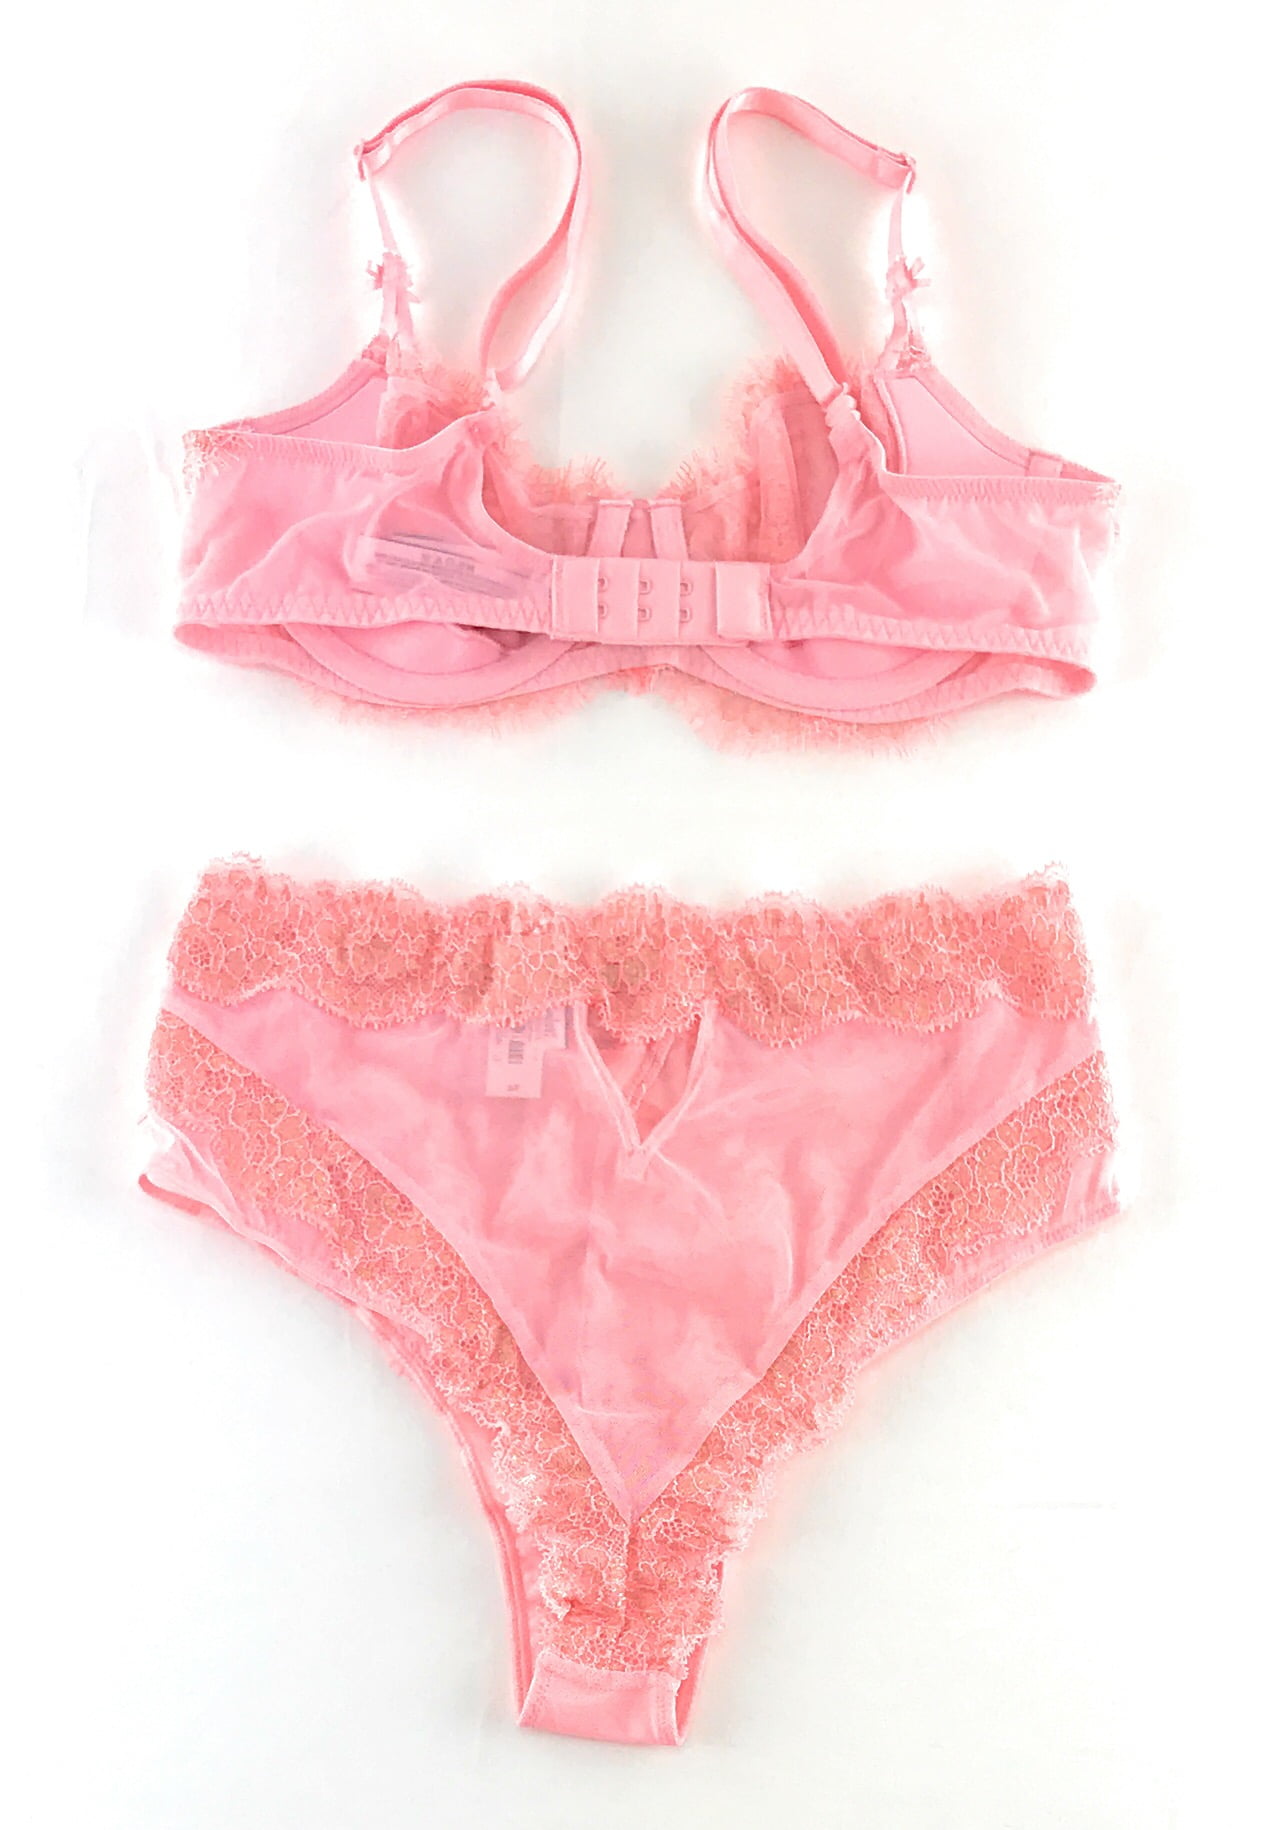 Victoria's Secret Dream Angels Wicked Uplift Bra and High Waist Cheeky Panty  Set 